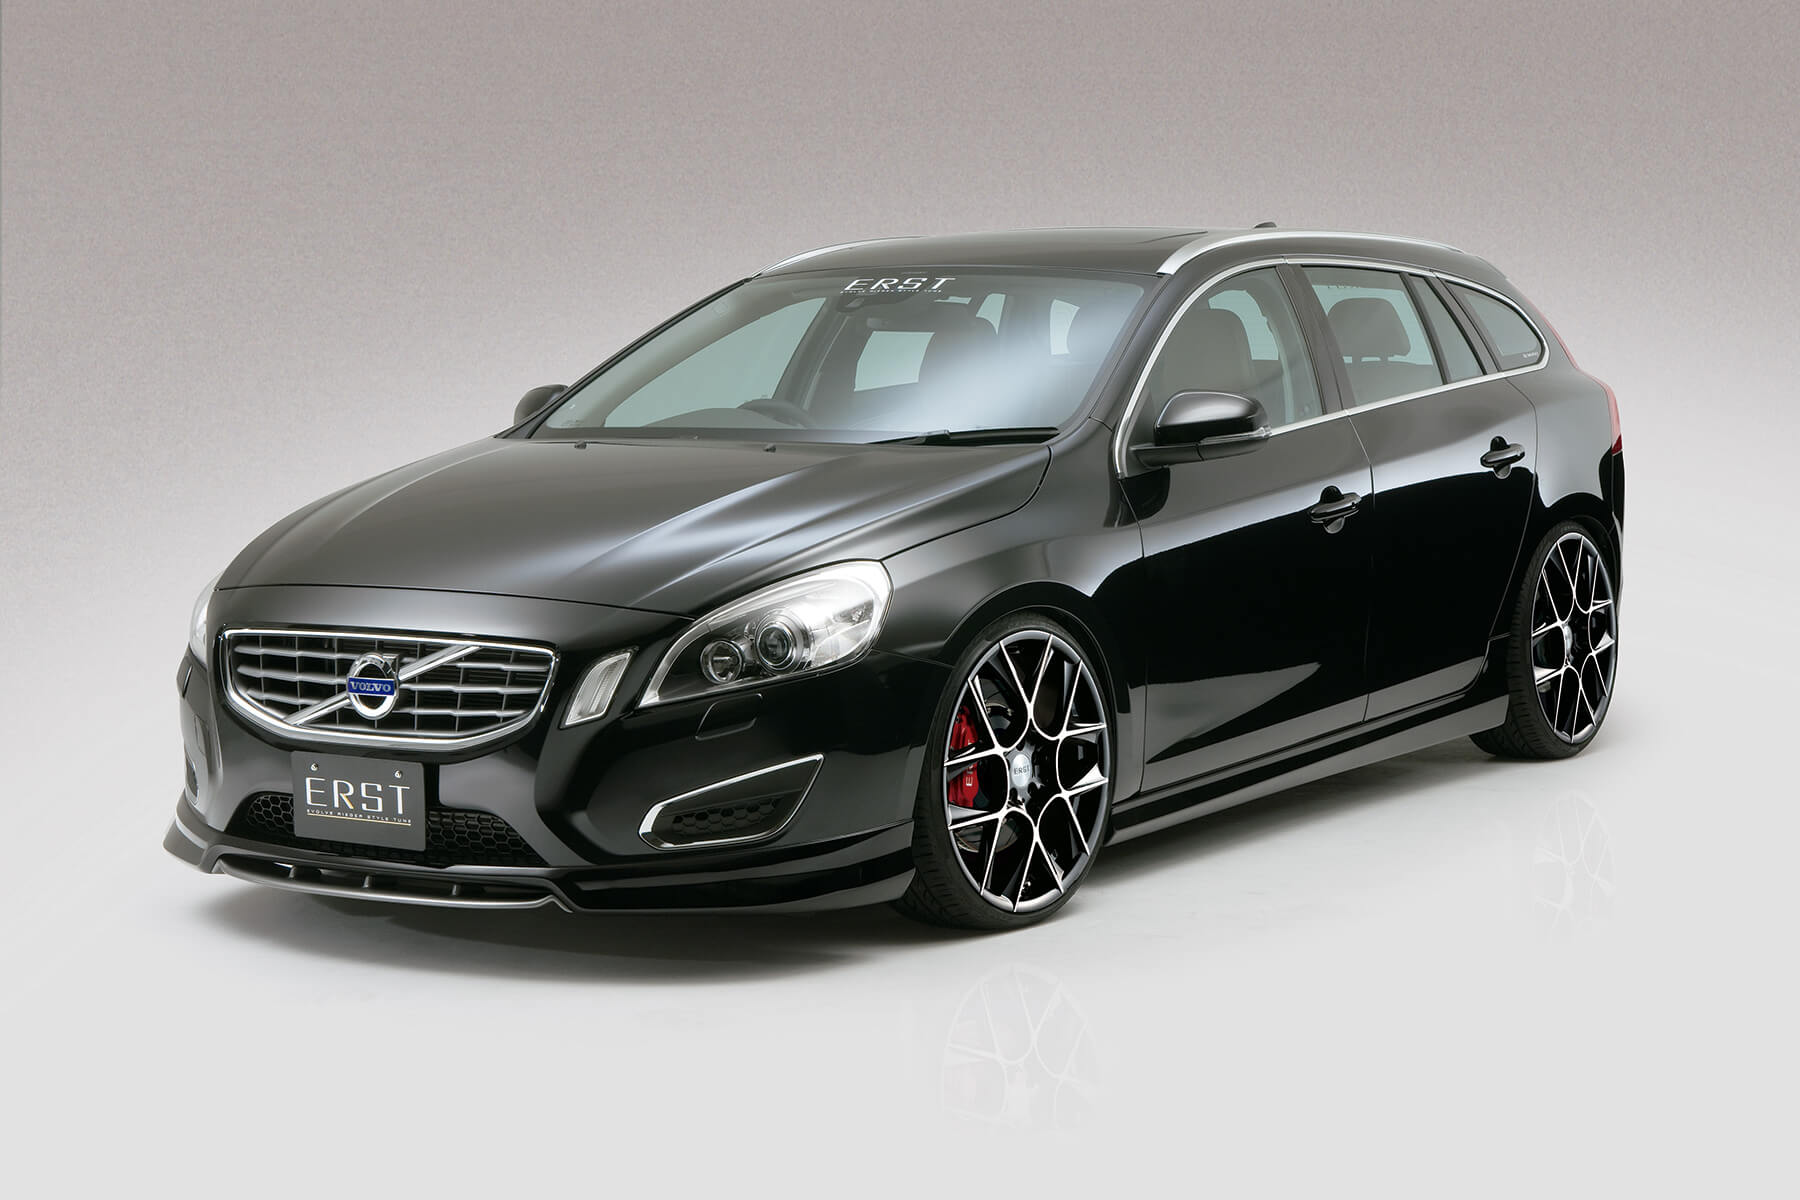 NEWS & TOPICS | ERST Tuner for the VOLVO